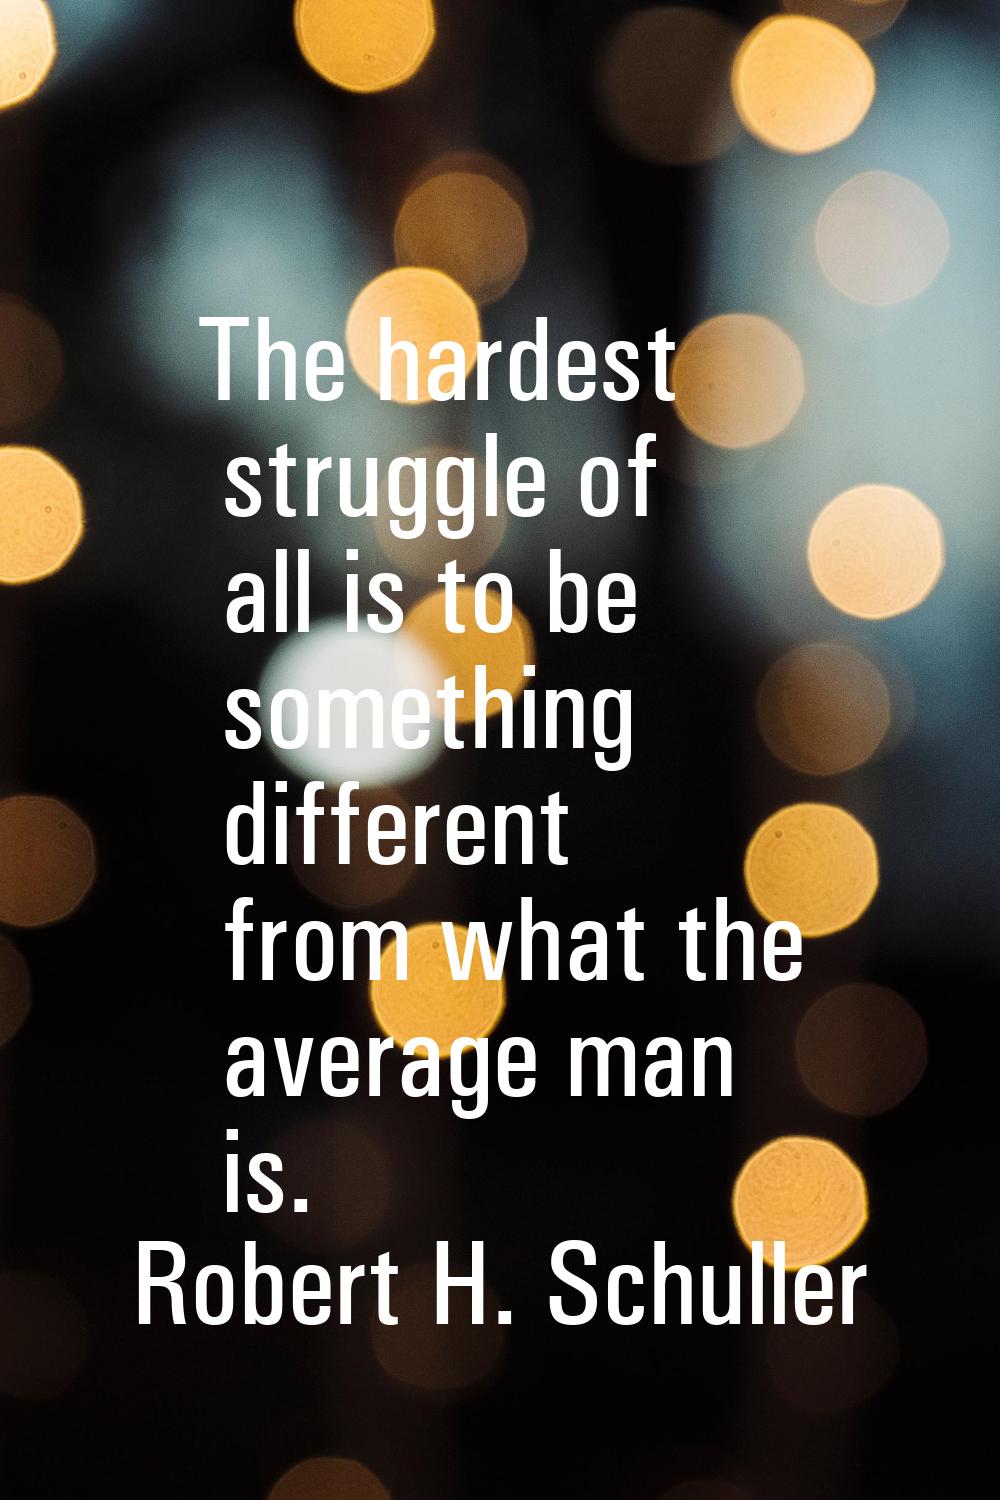 The hardest struggle of all is to be something different from what the average man is.